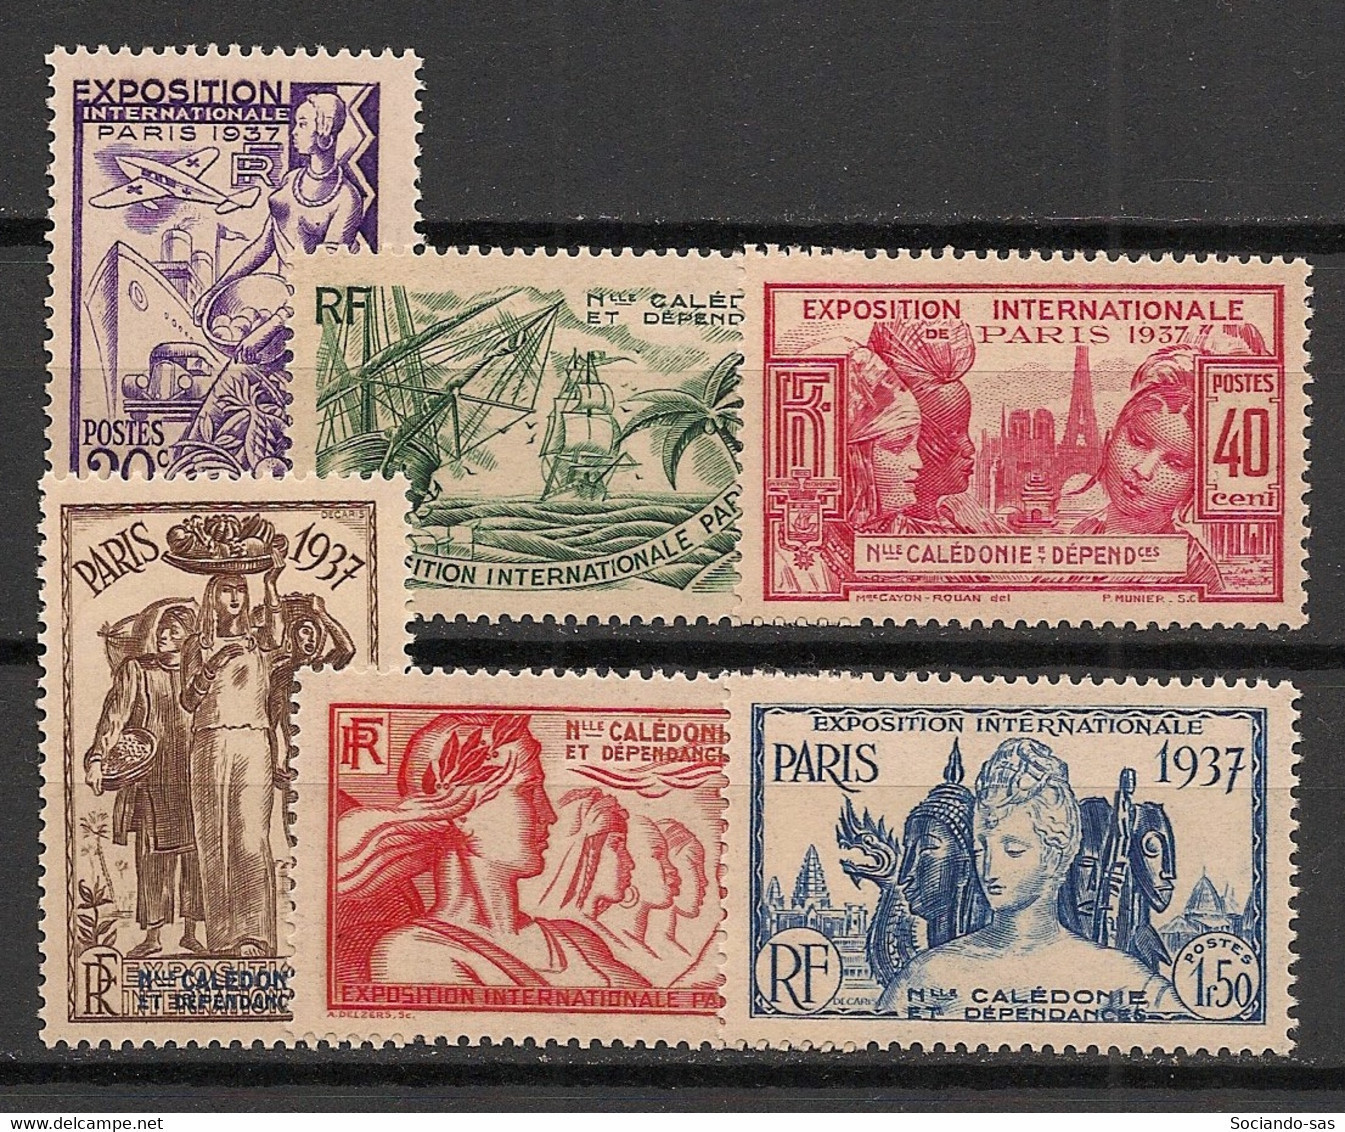 NOUVELLE CALEDONIE - 1937 - N°YT. 166 à 171 - Exposition Internationale - Neuf * / MH VF - Neufs